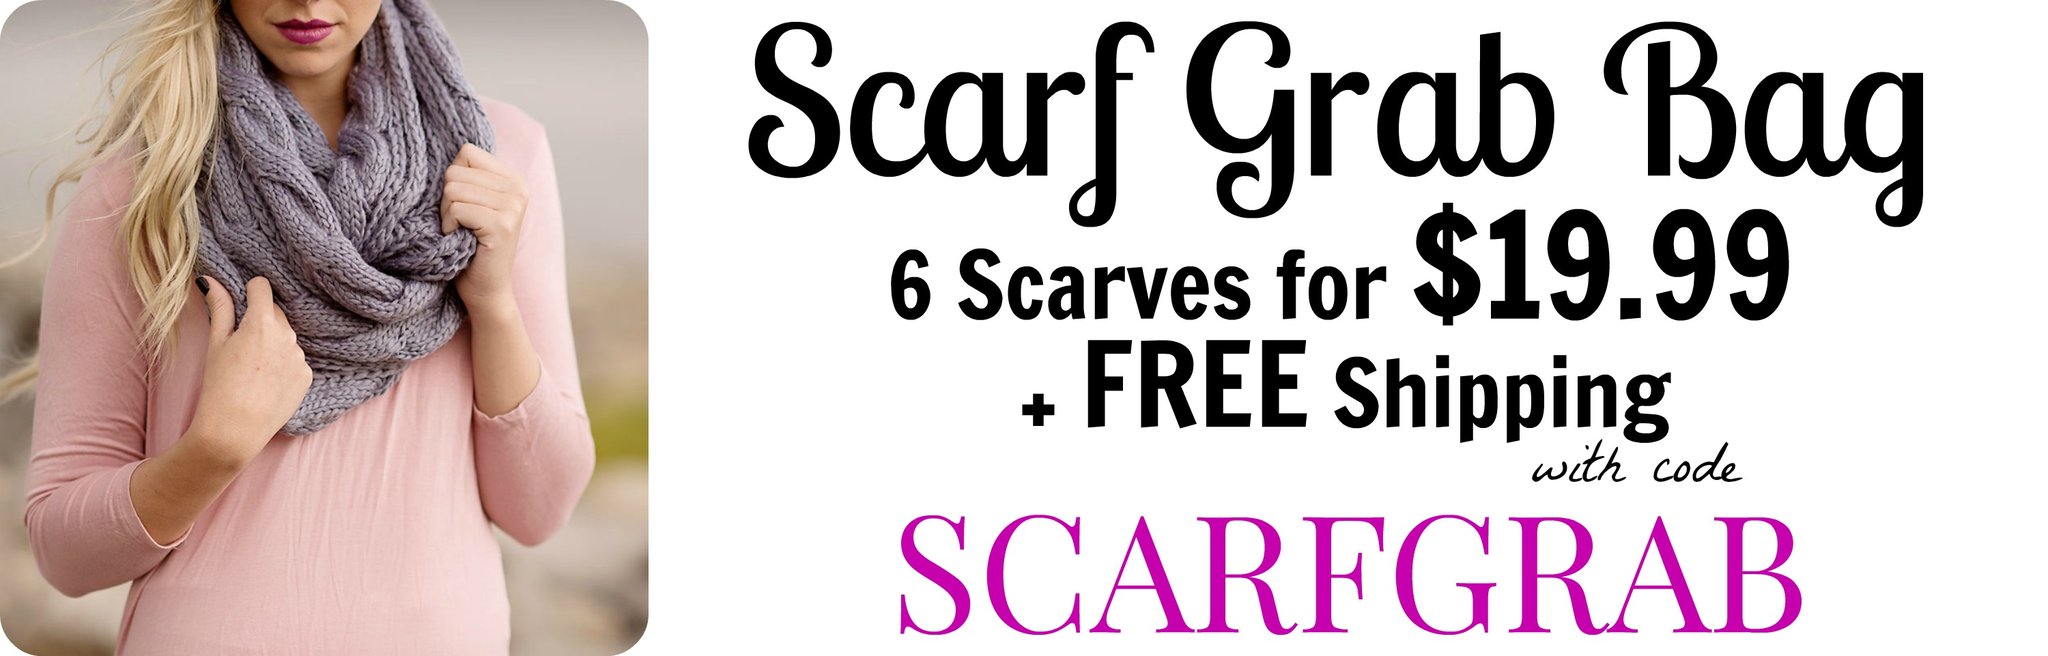 HOT! Scarf Grab Bag! 6 Scarves for just $19.99! Free shipping!